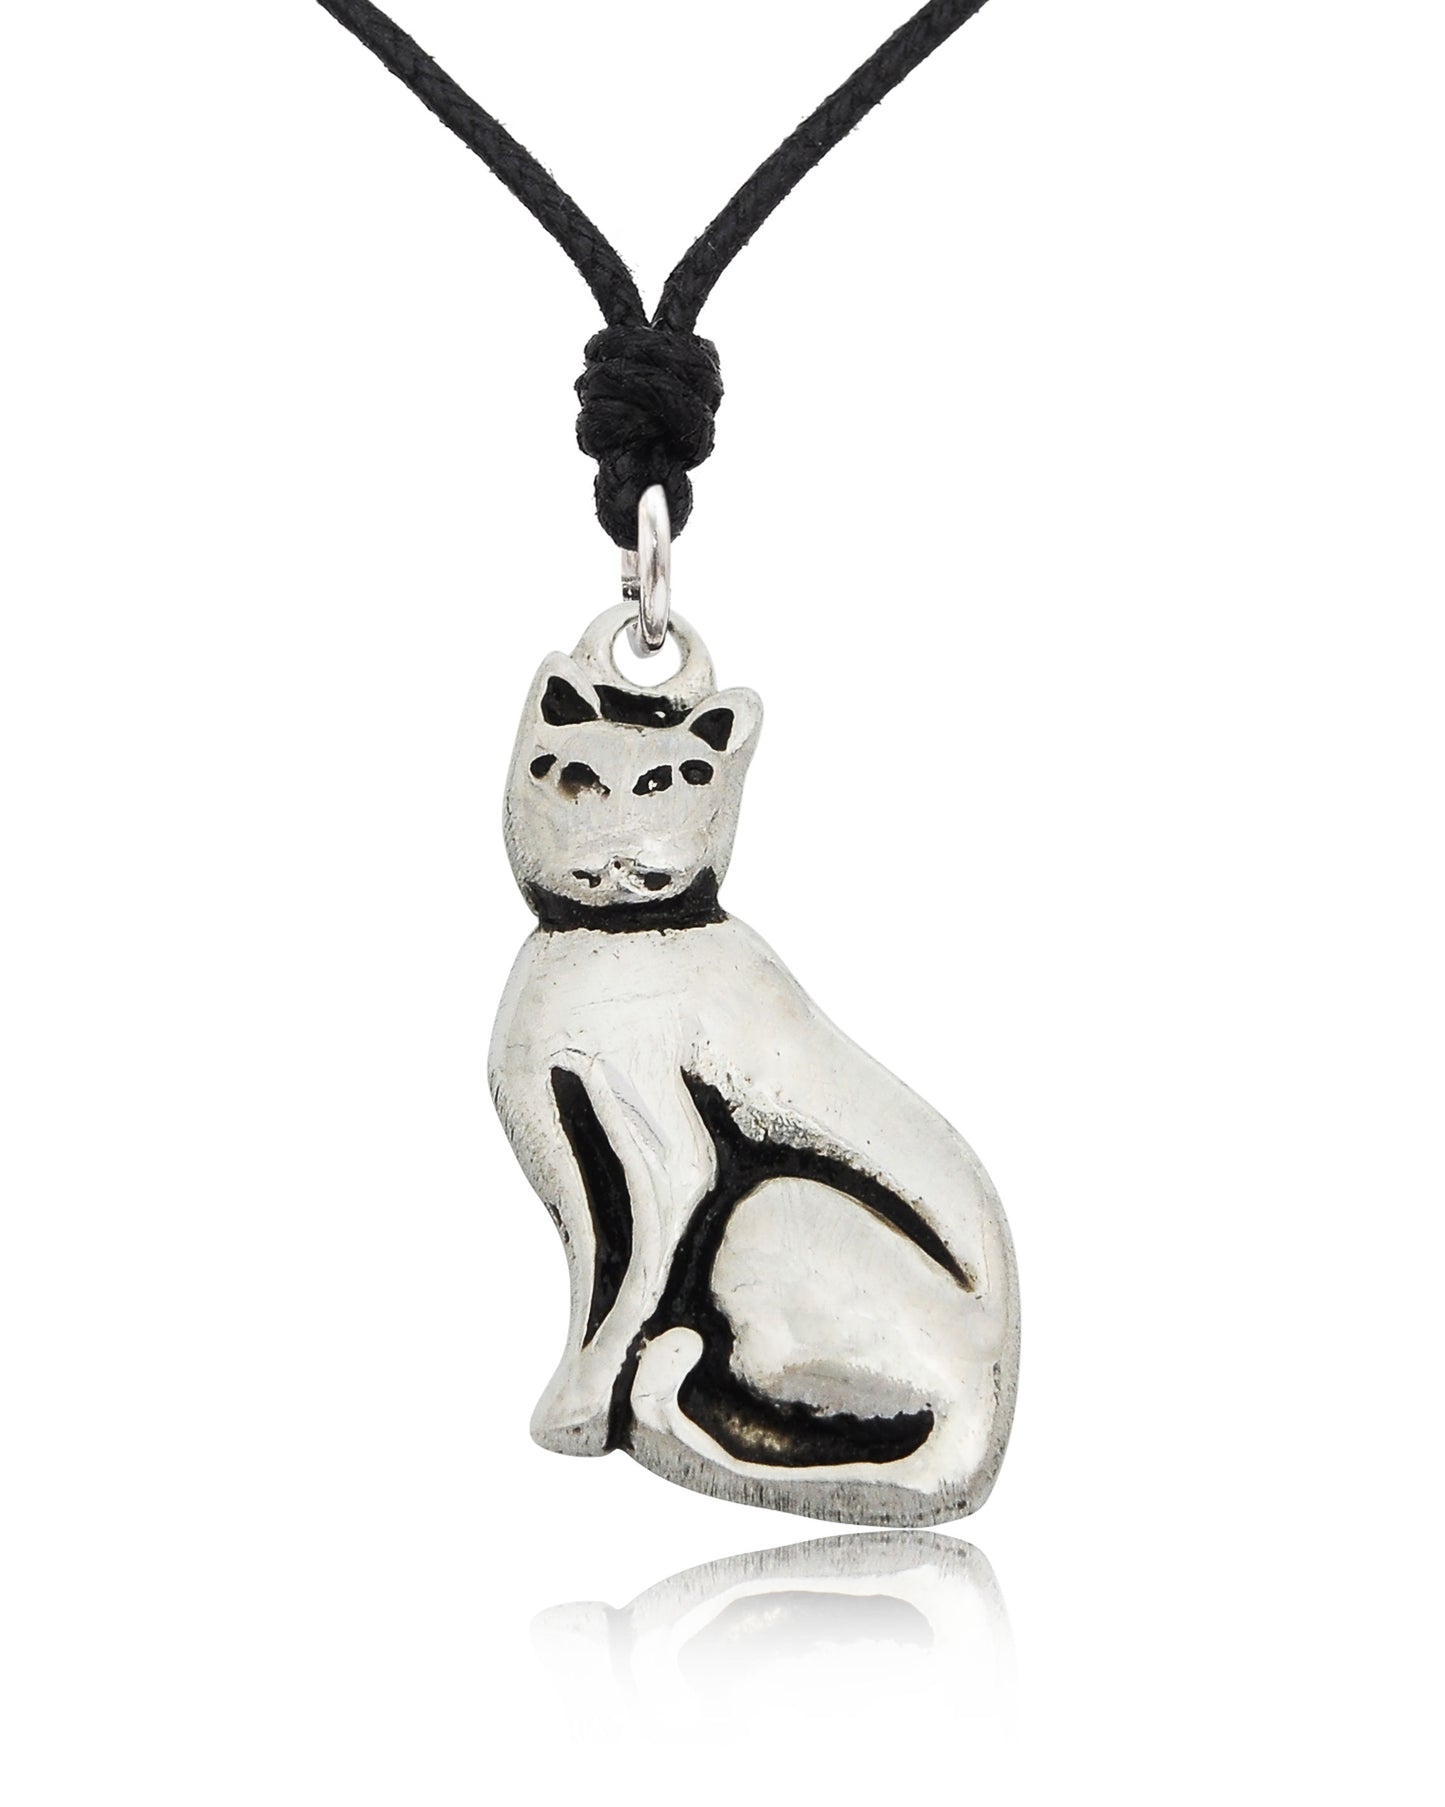 New Cat Sheba Silver Pewter Sterling Silver Gold Brass Charm Necklace Pendant Jewelry